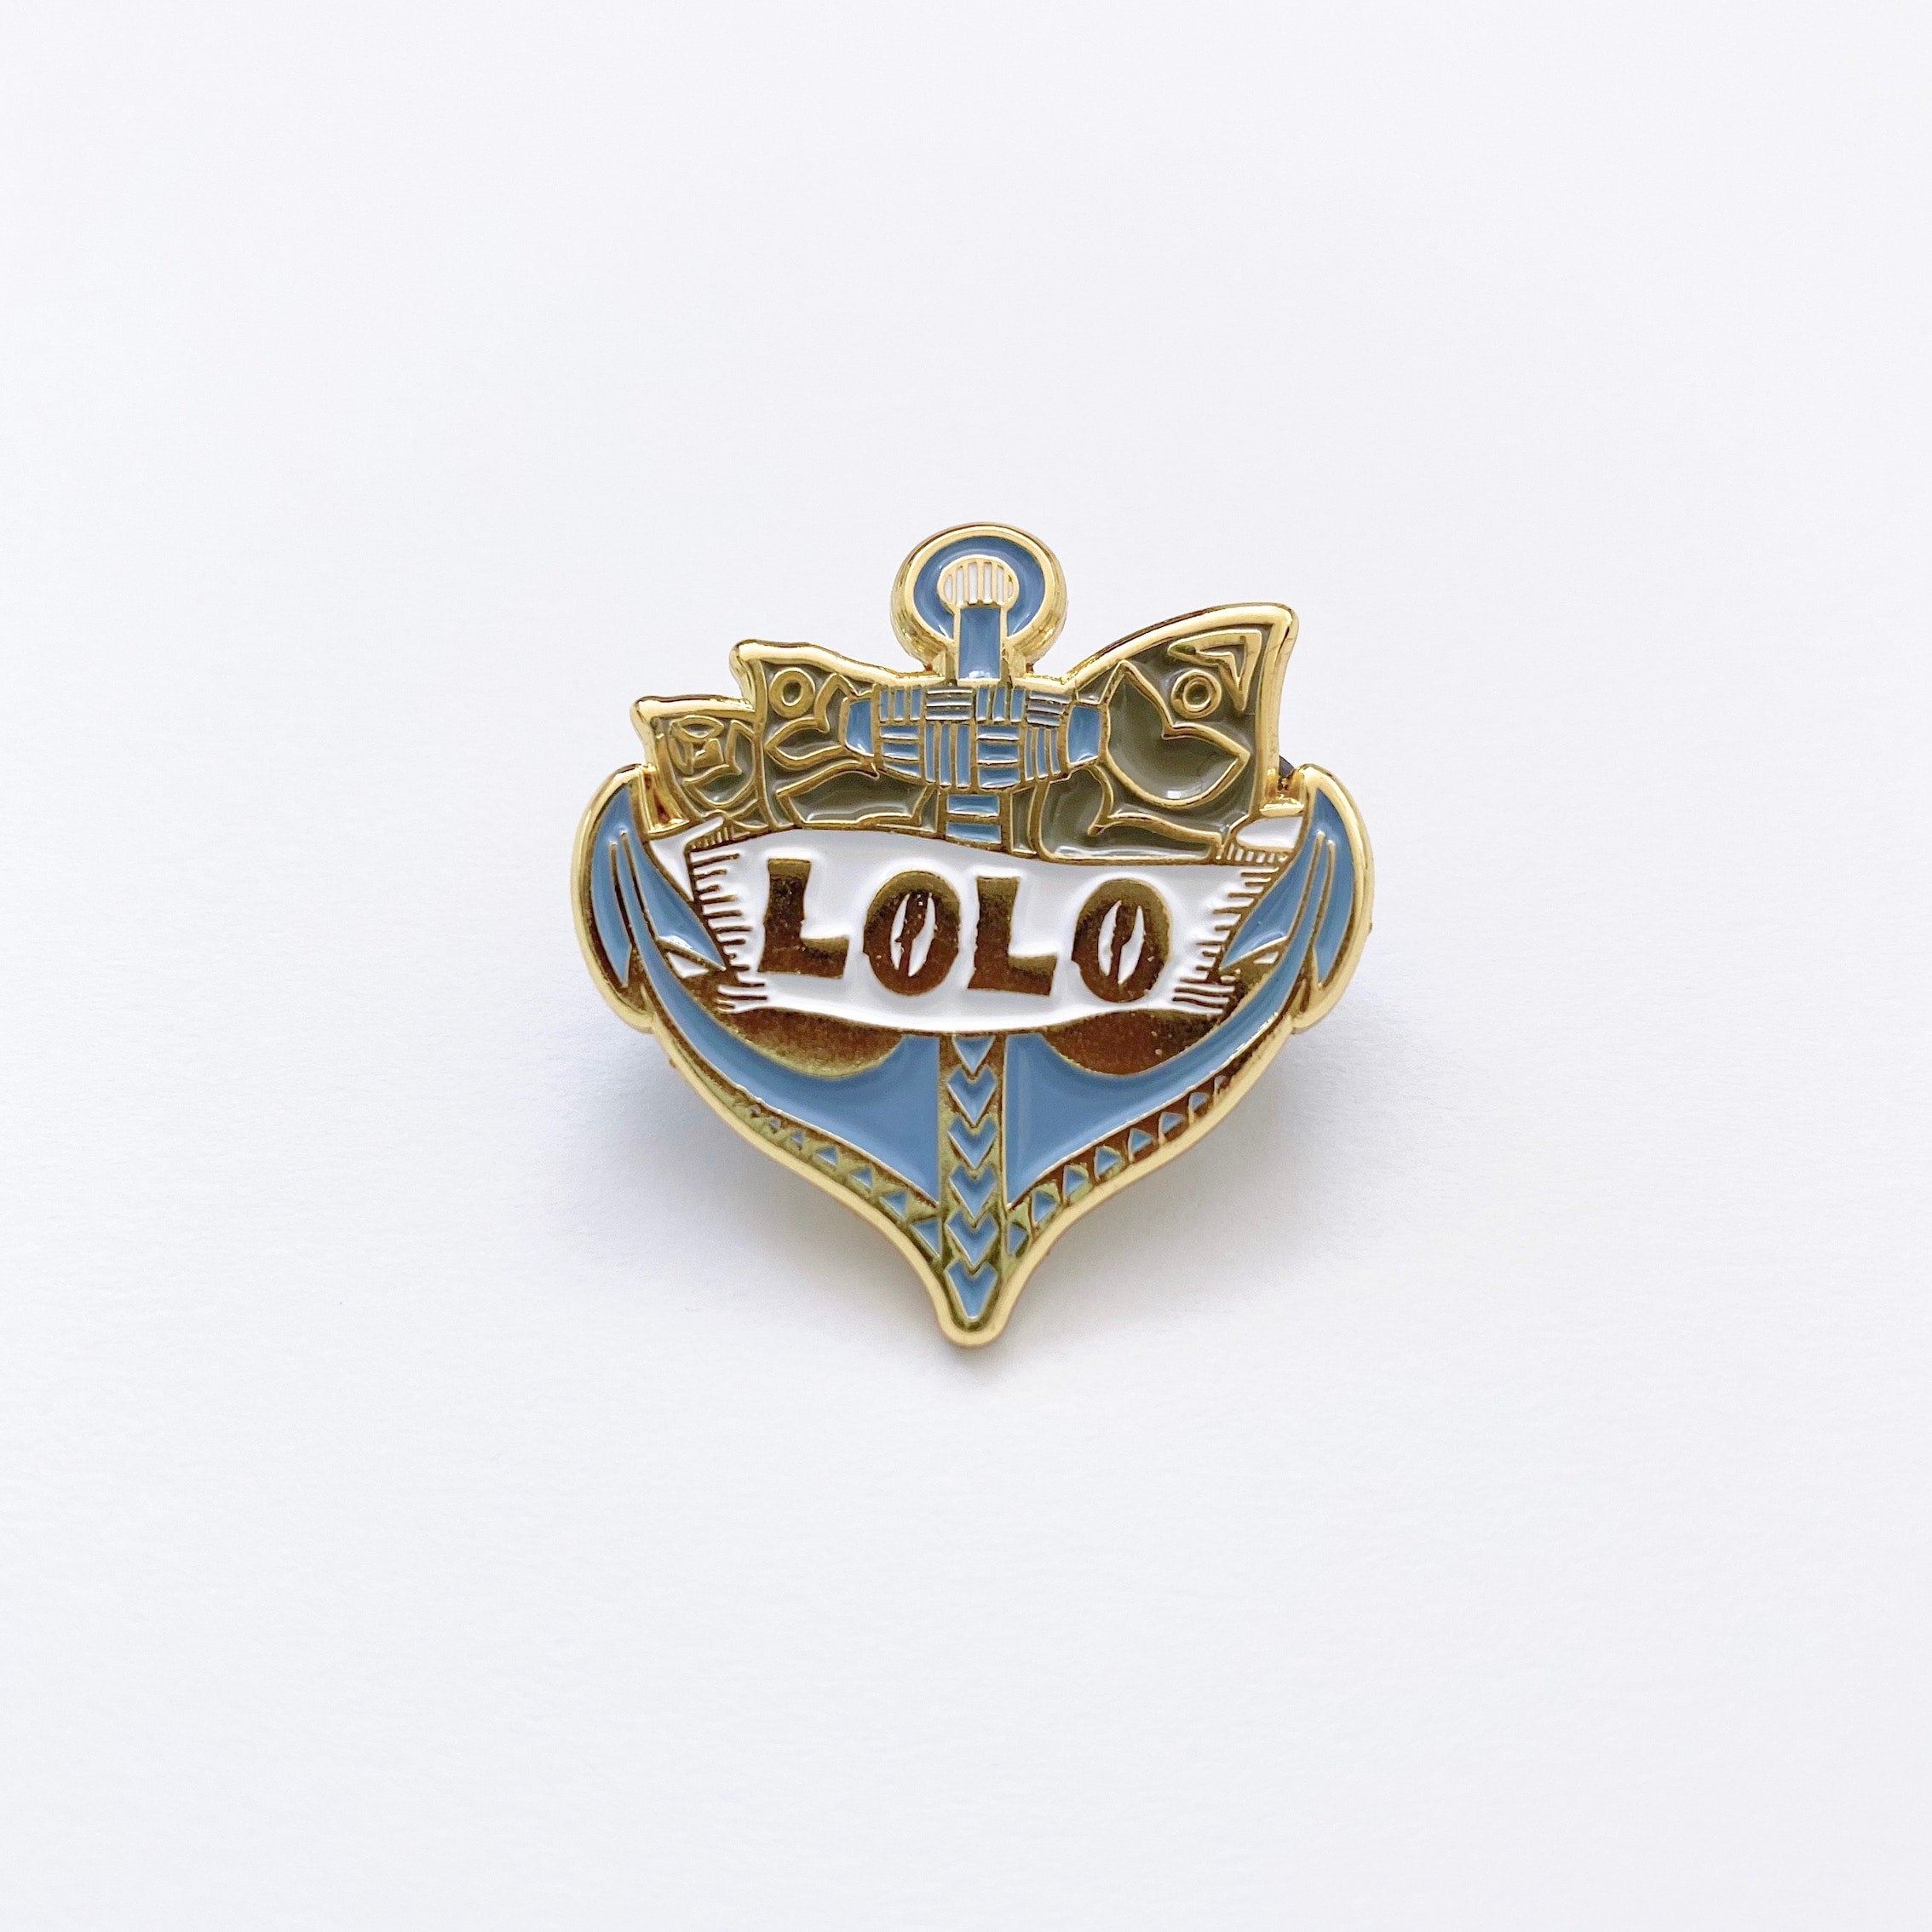 Lolo - Meaning of Lolo, What does Lolo mean?